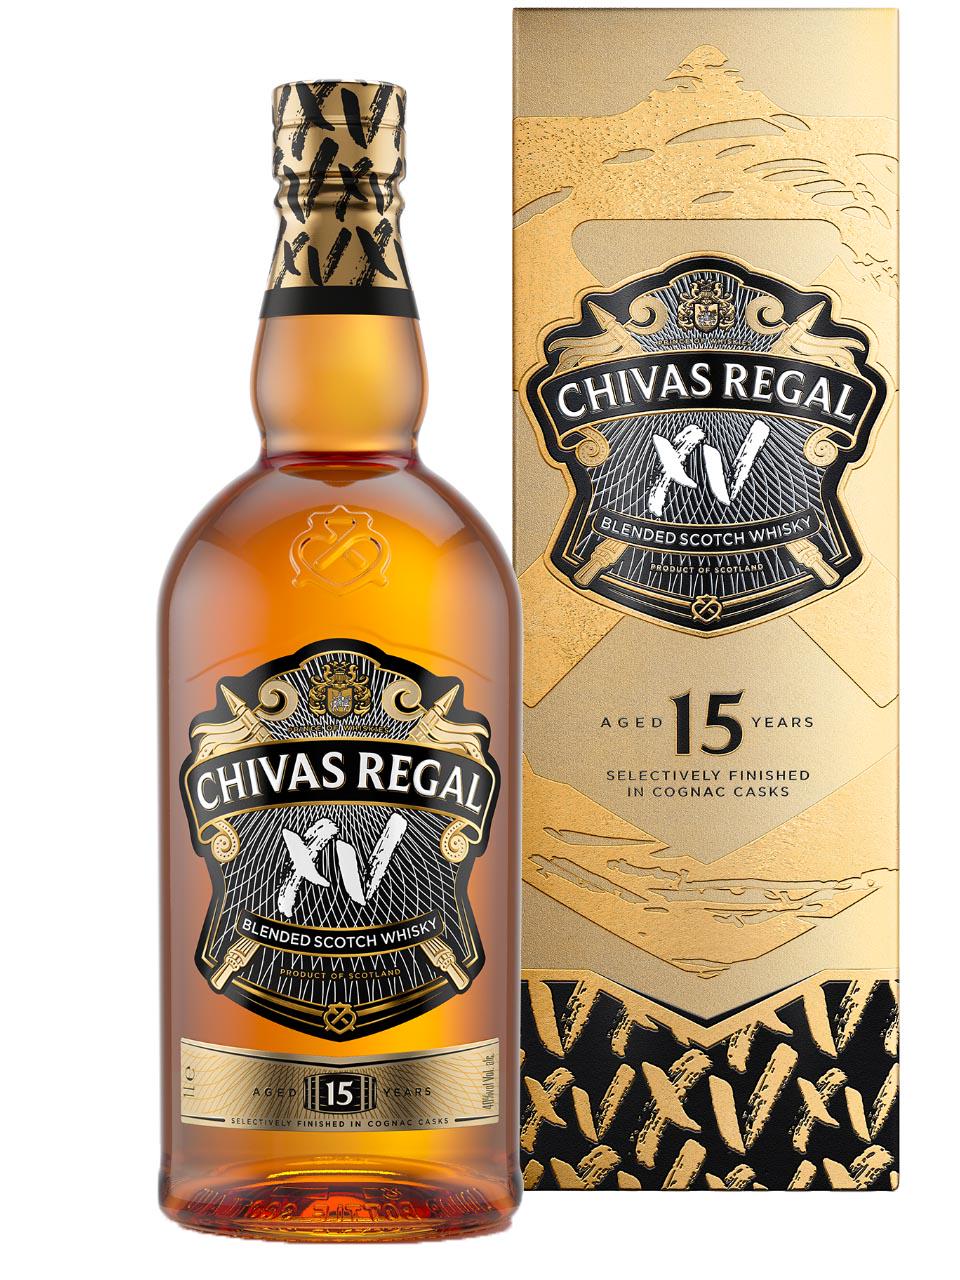 Chivas Regal Blended Scotch Whisky 12y 40% 1L in duty-free at airport  Vilnius